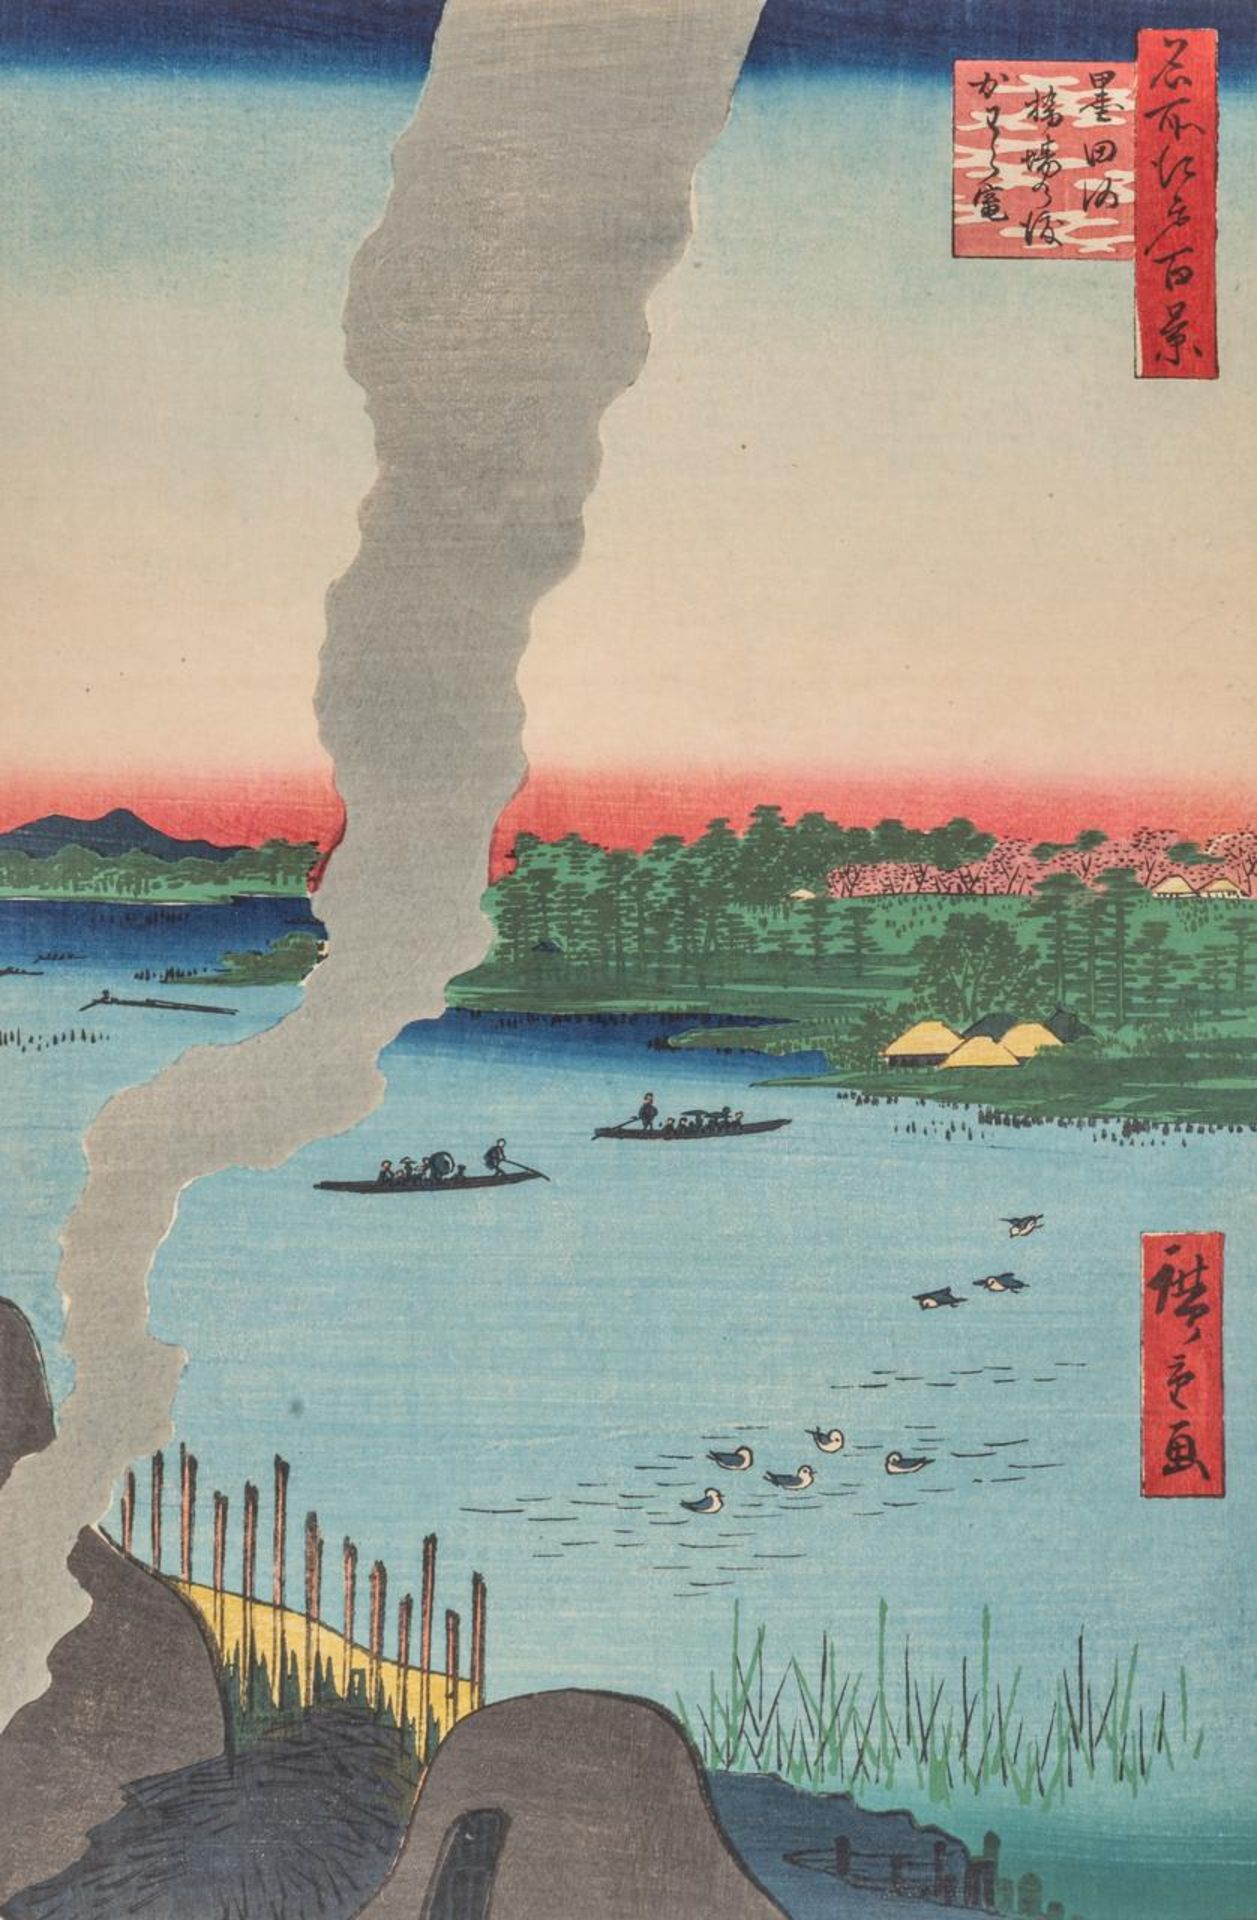 Ando Hiroshige, the Sumida river, no. 37 from the series "one hundred views on Edo", 23 x 34 cm (+)